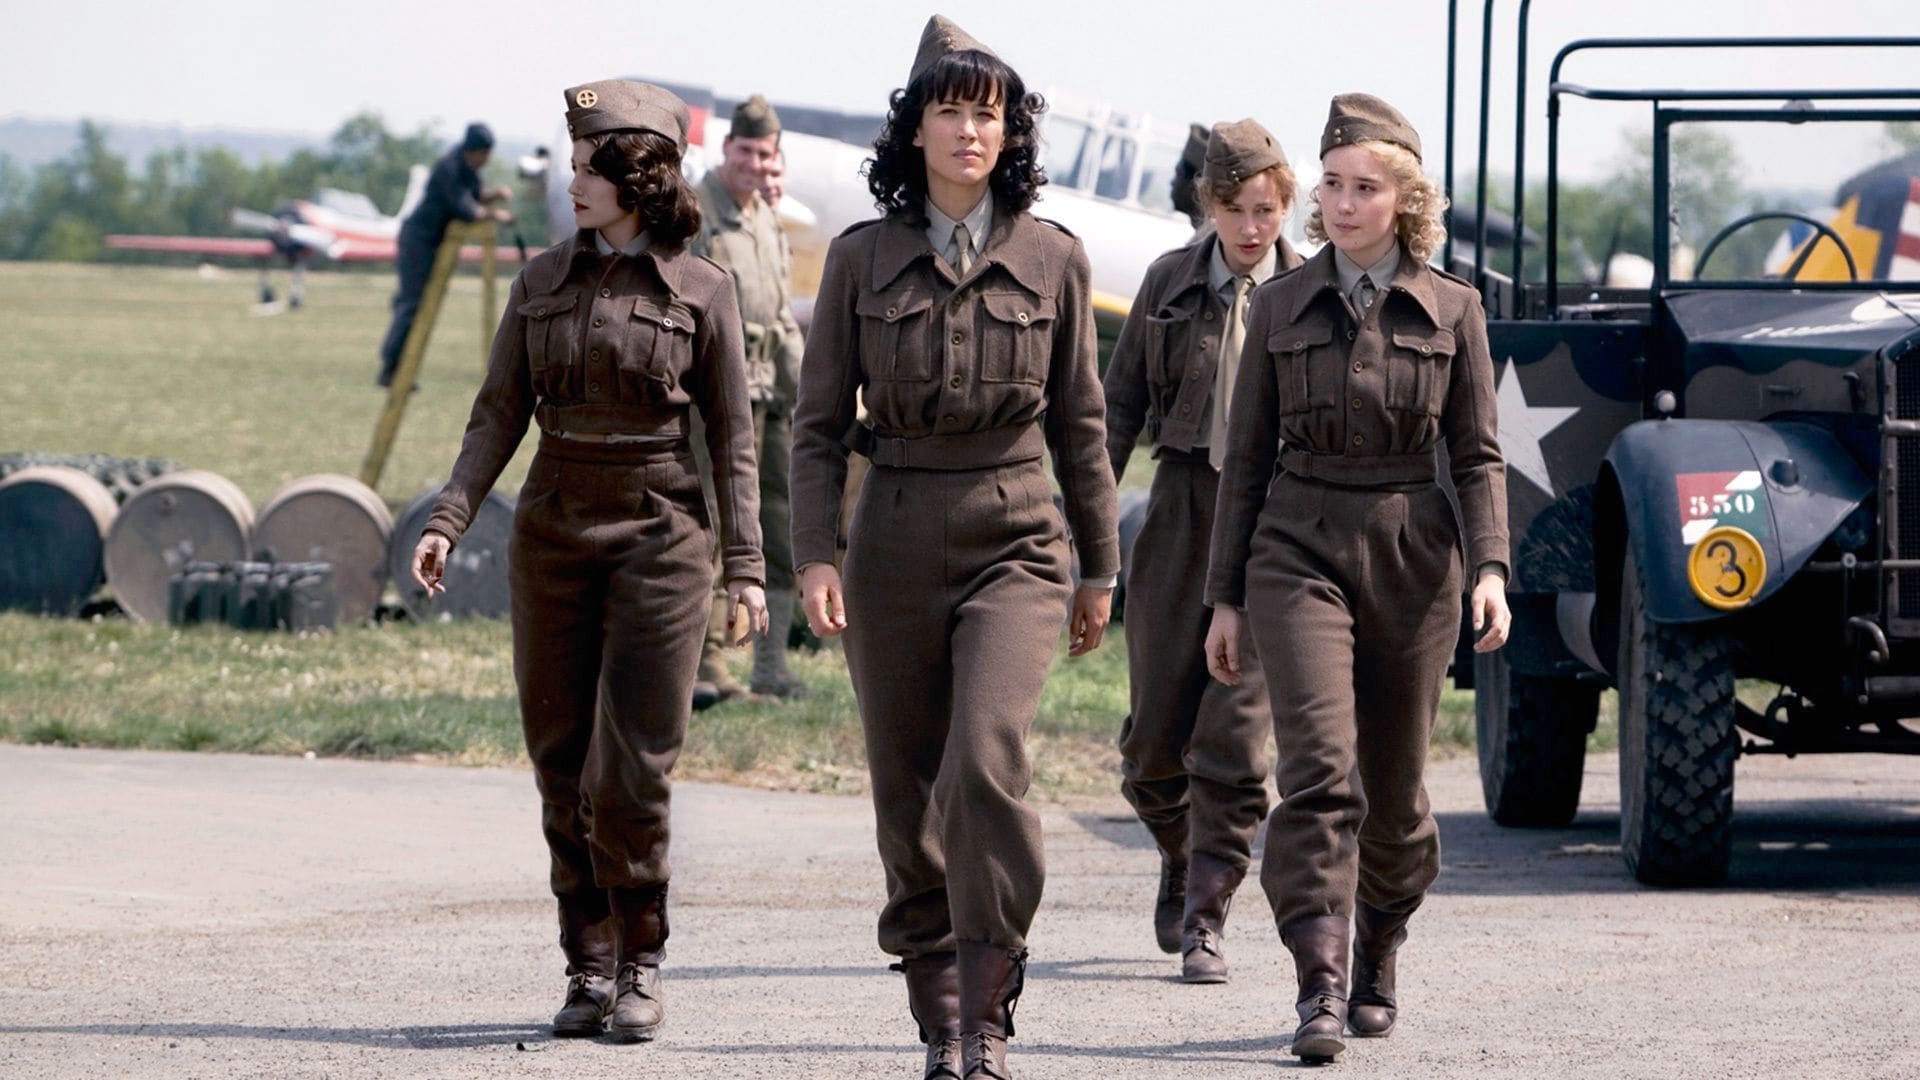 The female agents on the way to an airplane